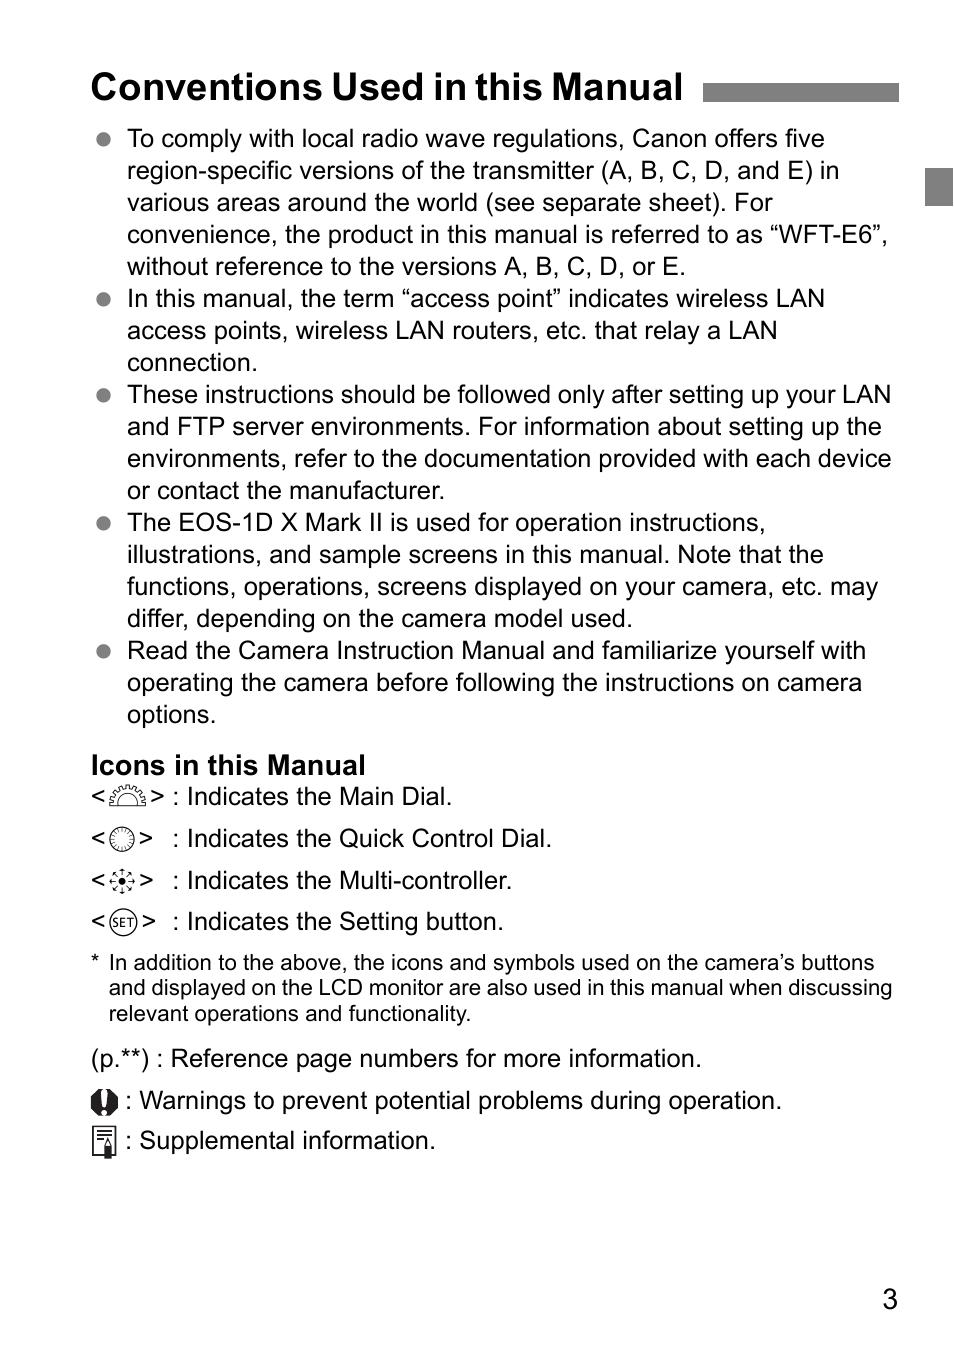 Conventions used in this manual | Canon EOS 1D X Mark II User Manual | Page 3 / 152